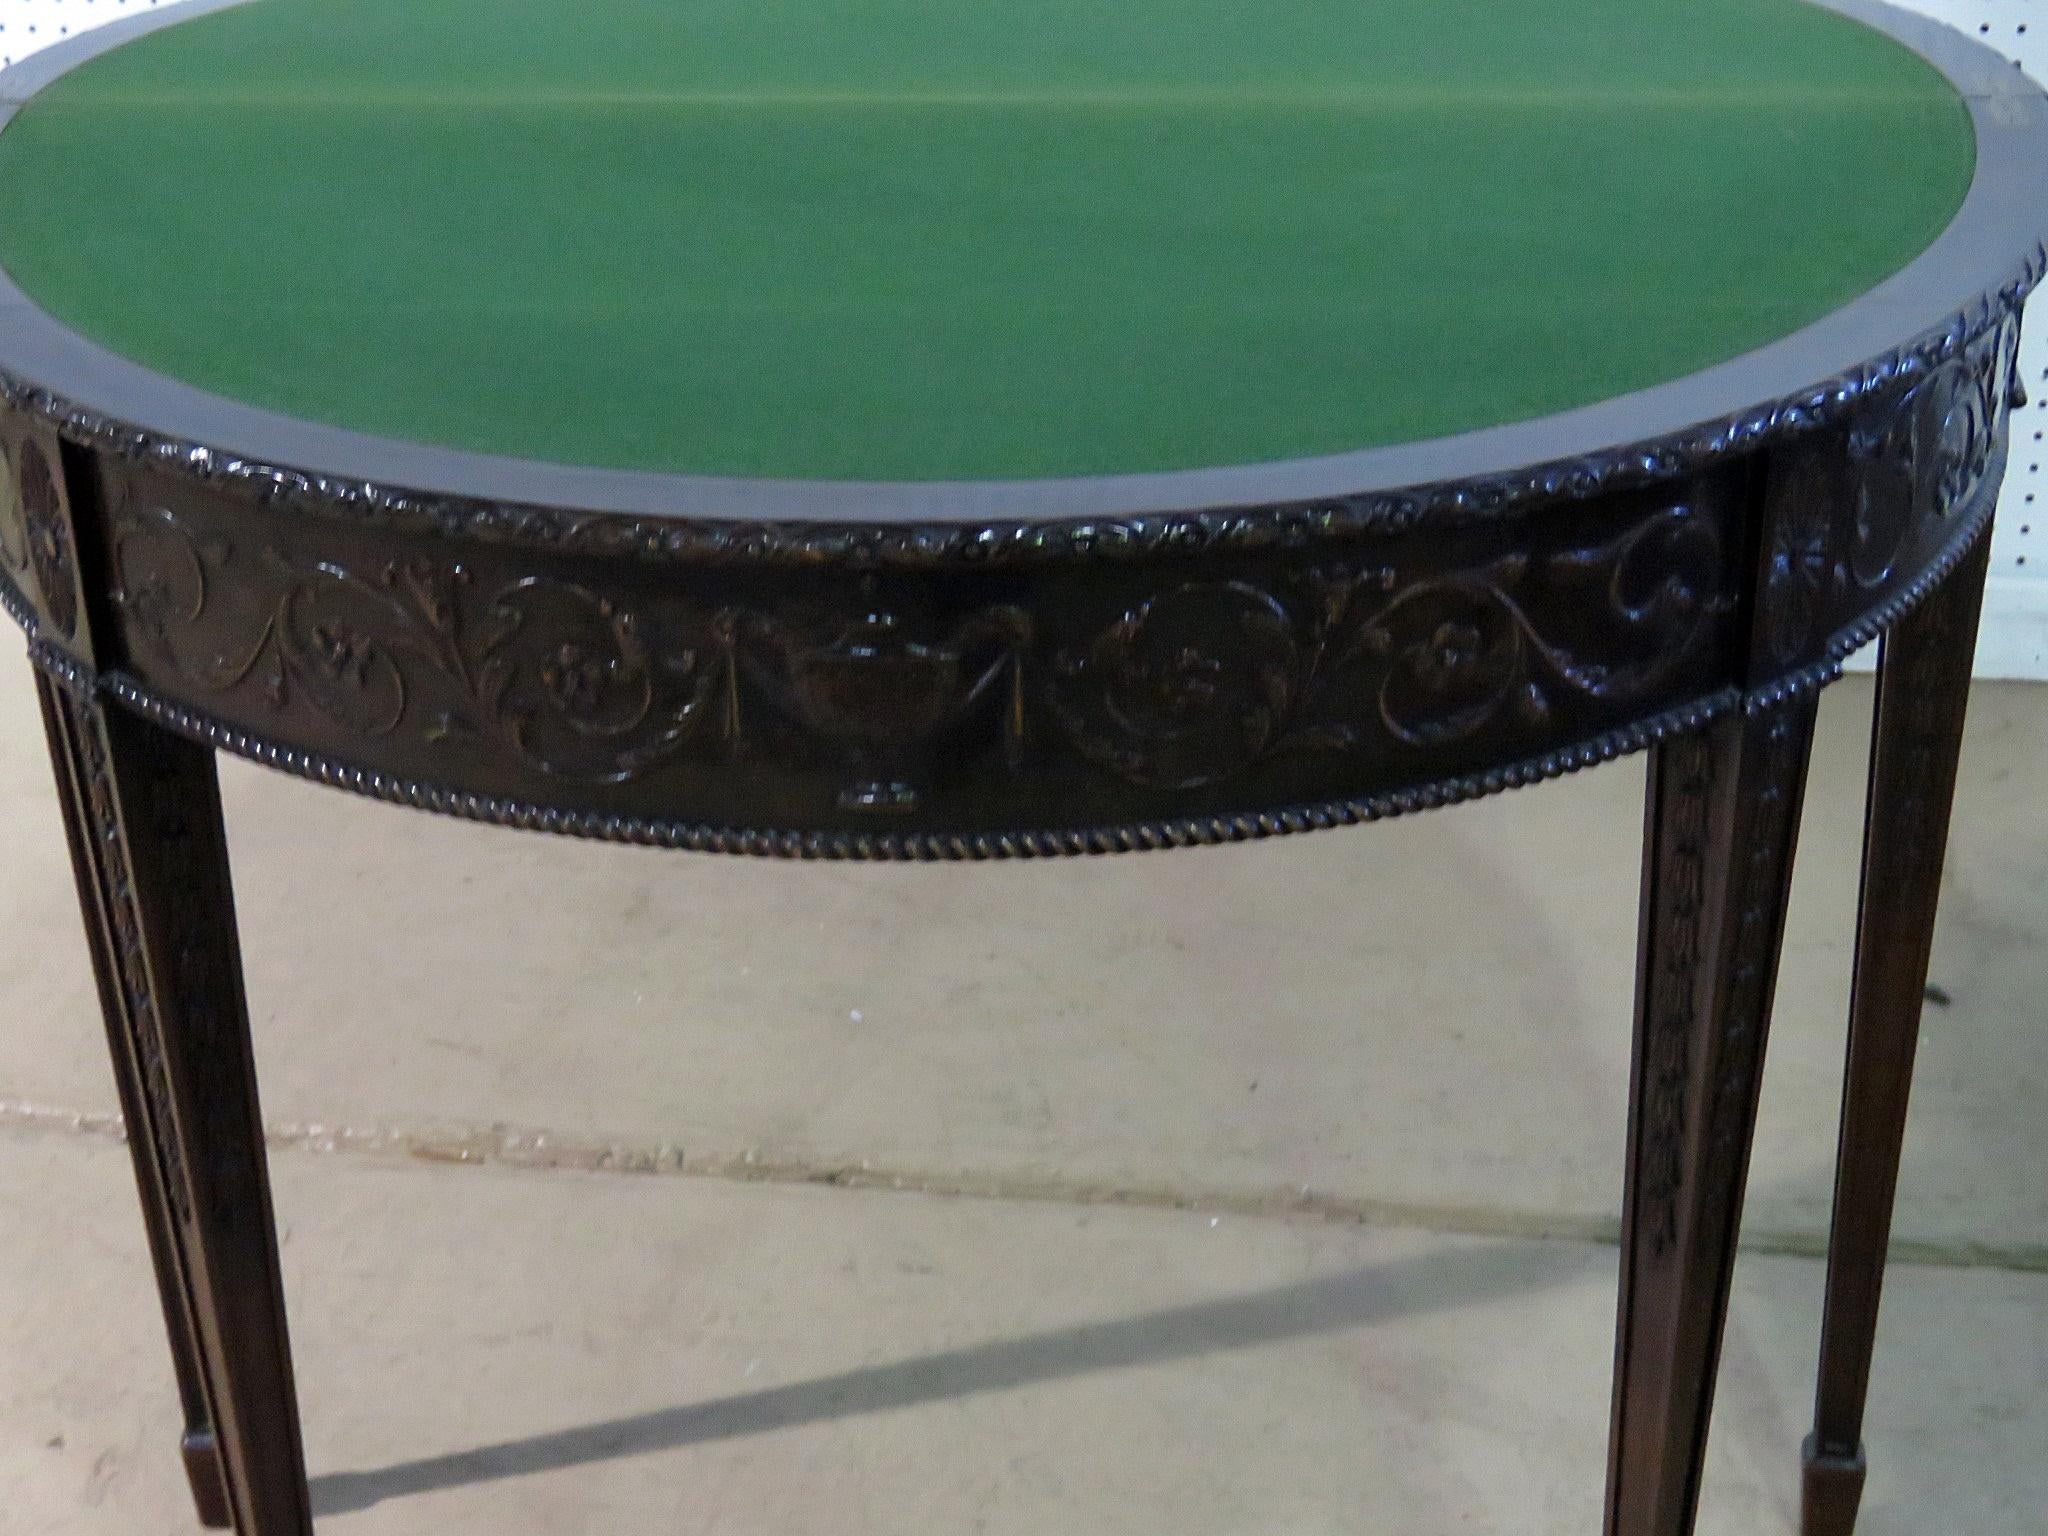 This is a superbly carved solid mahogany Adams style flip top distressed finished game table with carved urn and floral carved details. The table can also of course be used as a console or sofa table. Measures: 31.5